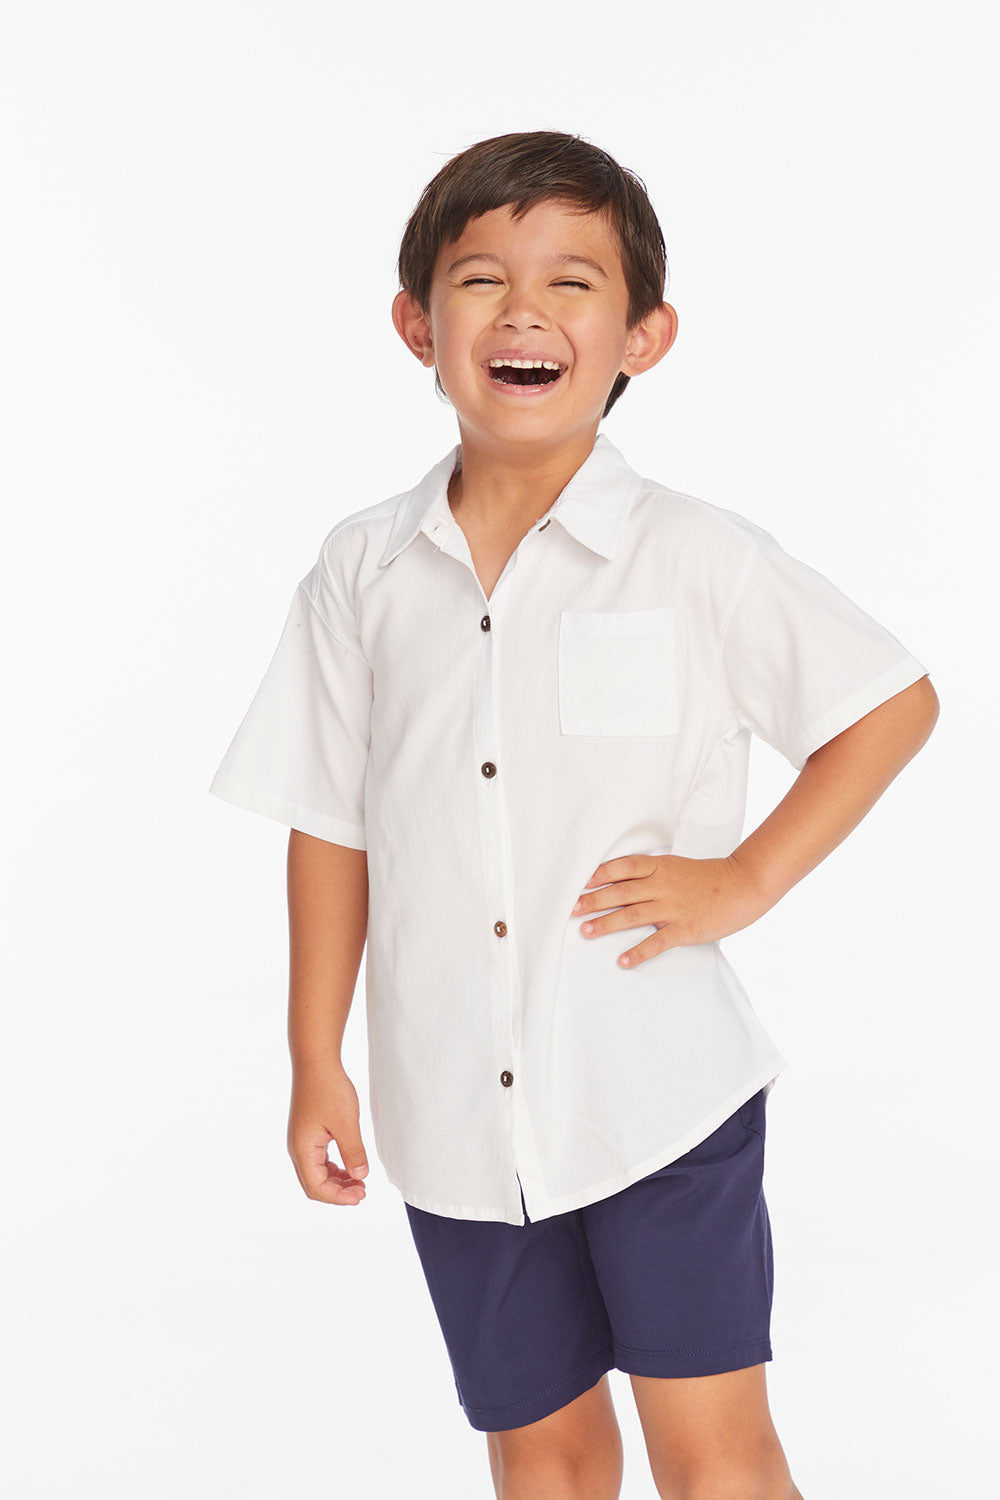 Collared White Button Down Boys Shirt Boys chaserbrand